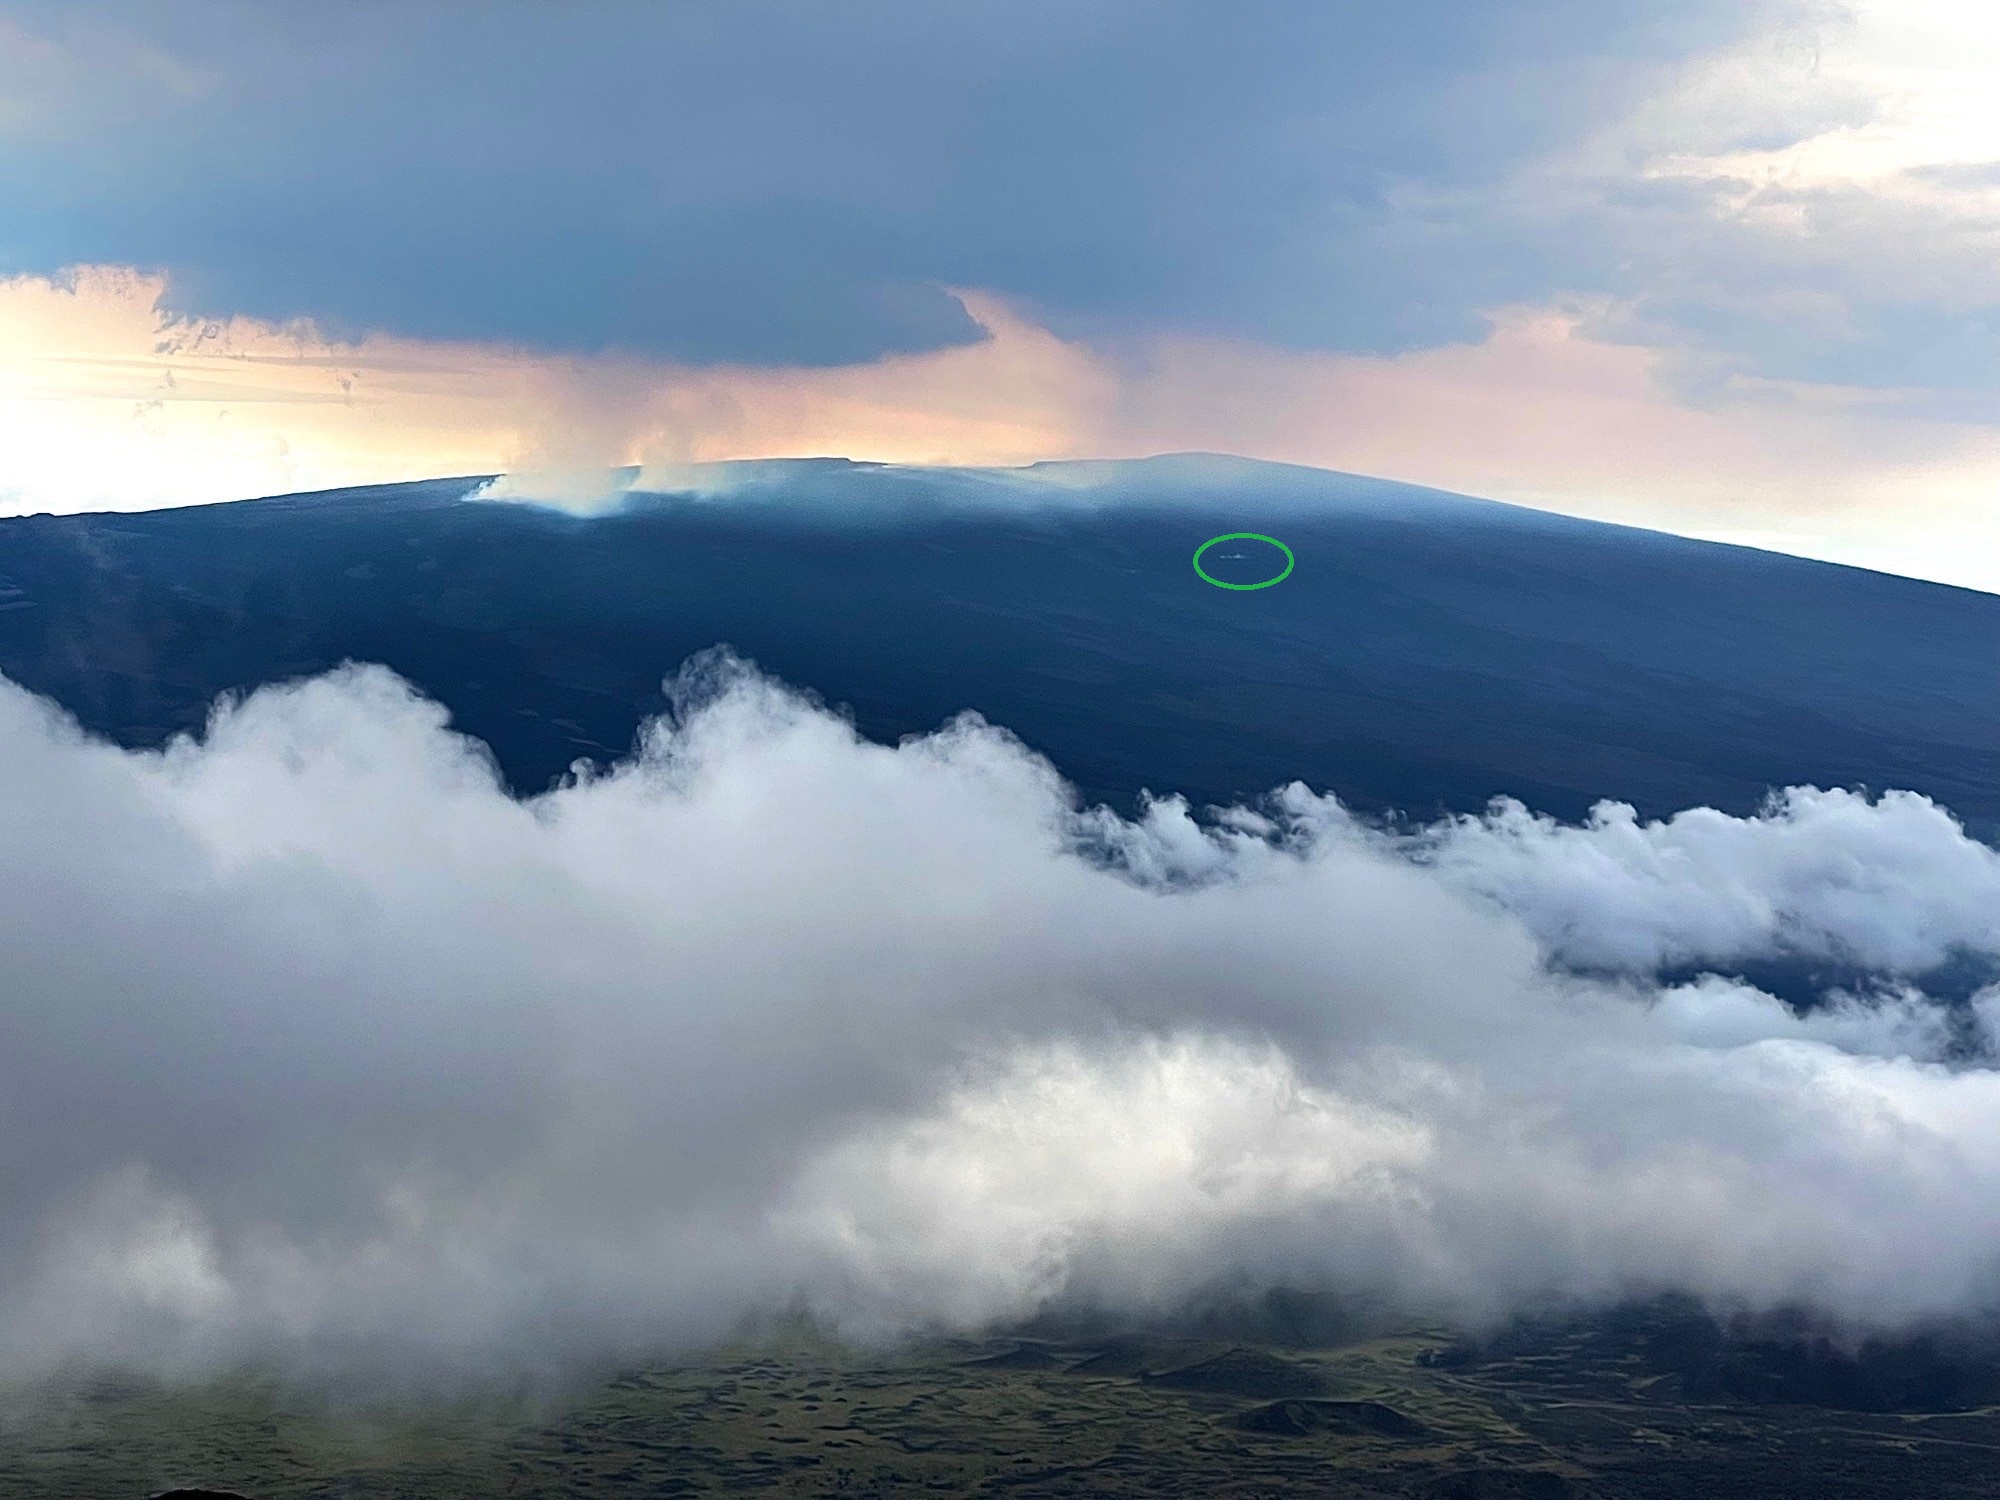 Image of Mauna Loa from Mauna Kea showing the eruption sites and MLSO location (green circle)